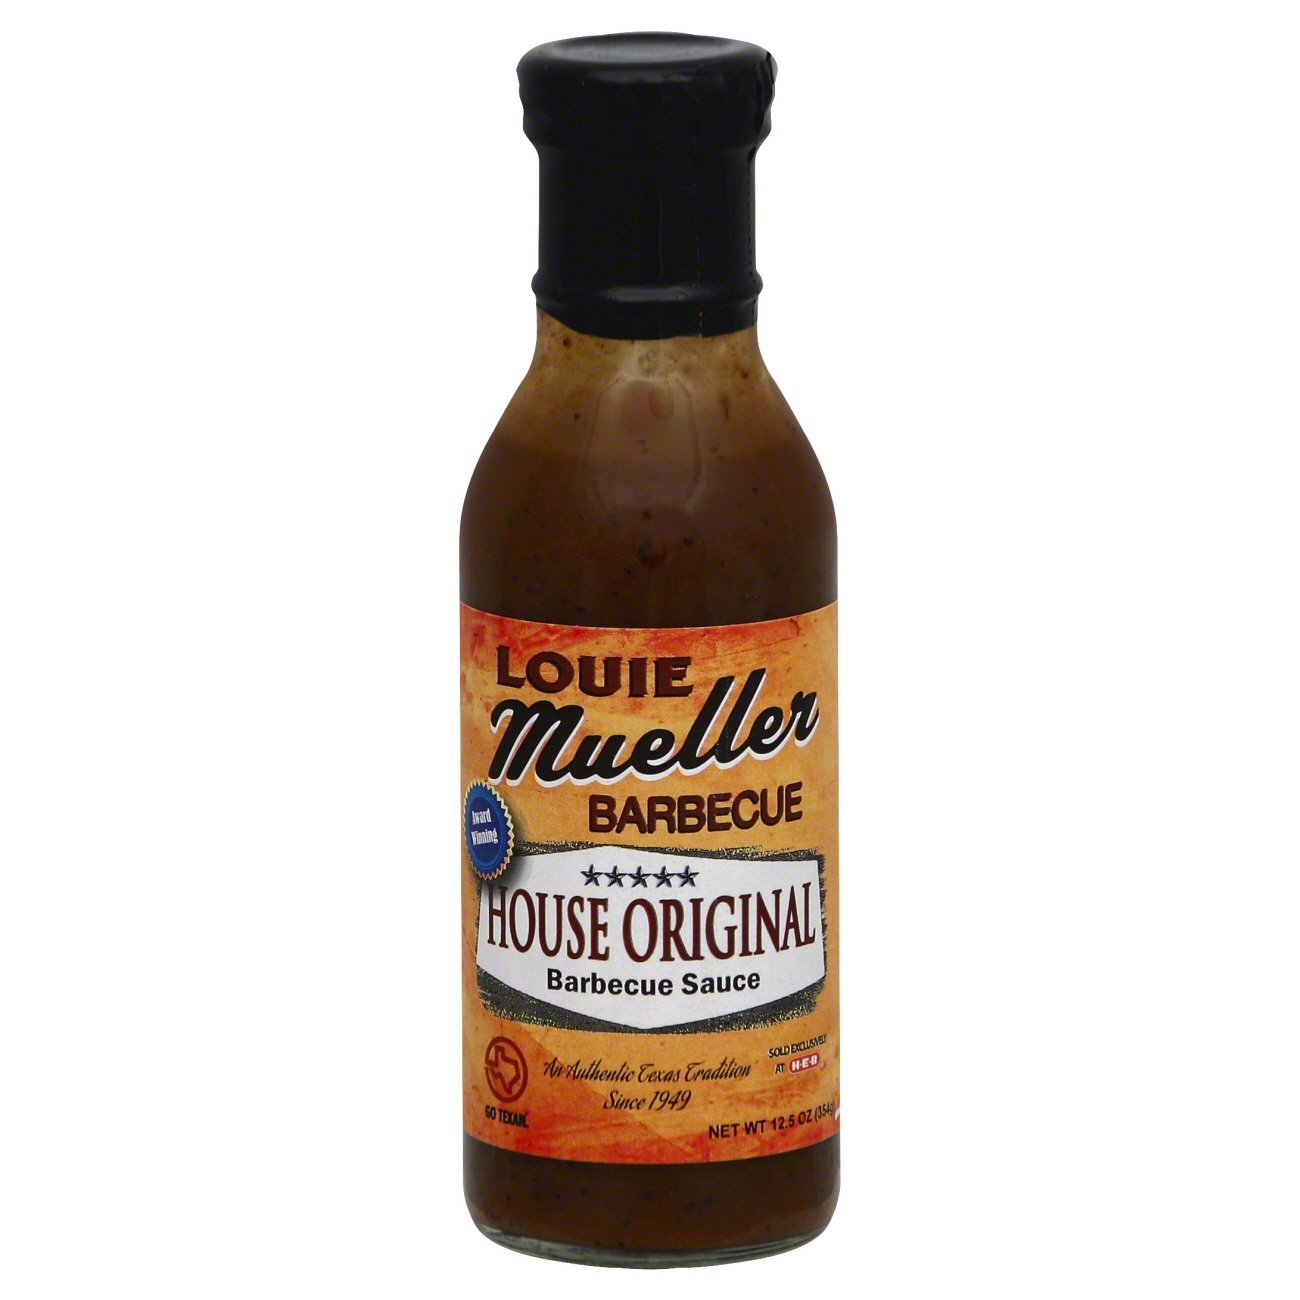 Louie Mueller Barbecue House Original BBQ Sauce - Shop Barbecue Sauces ...